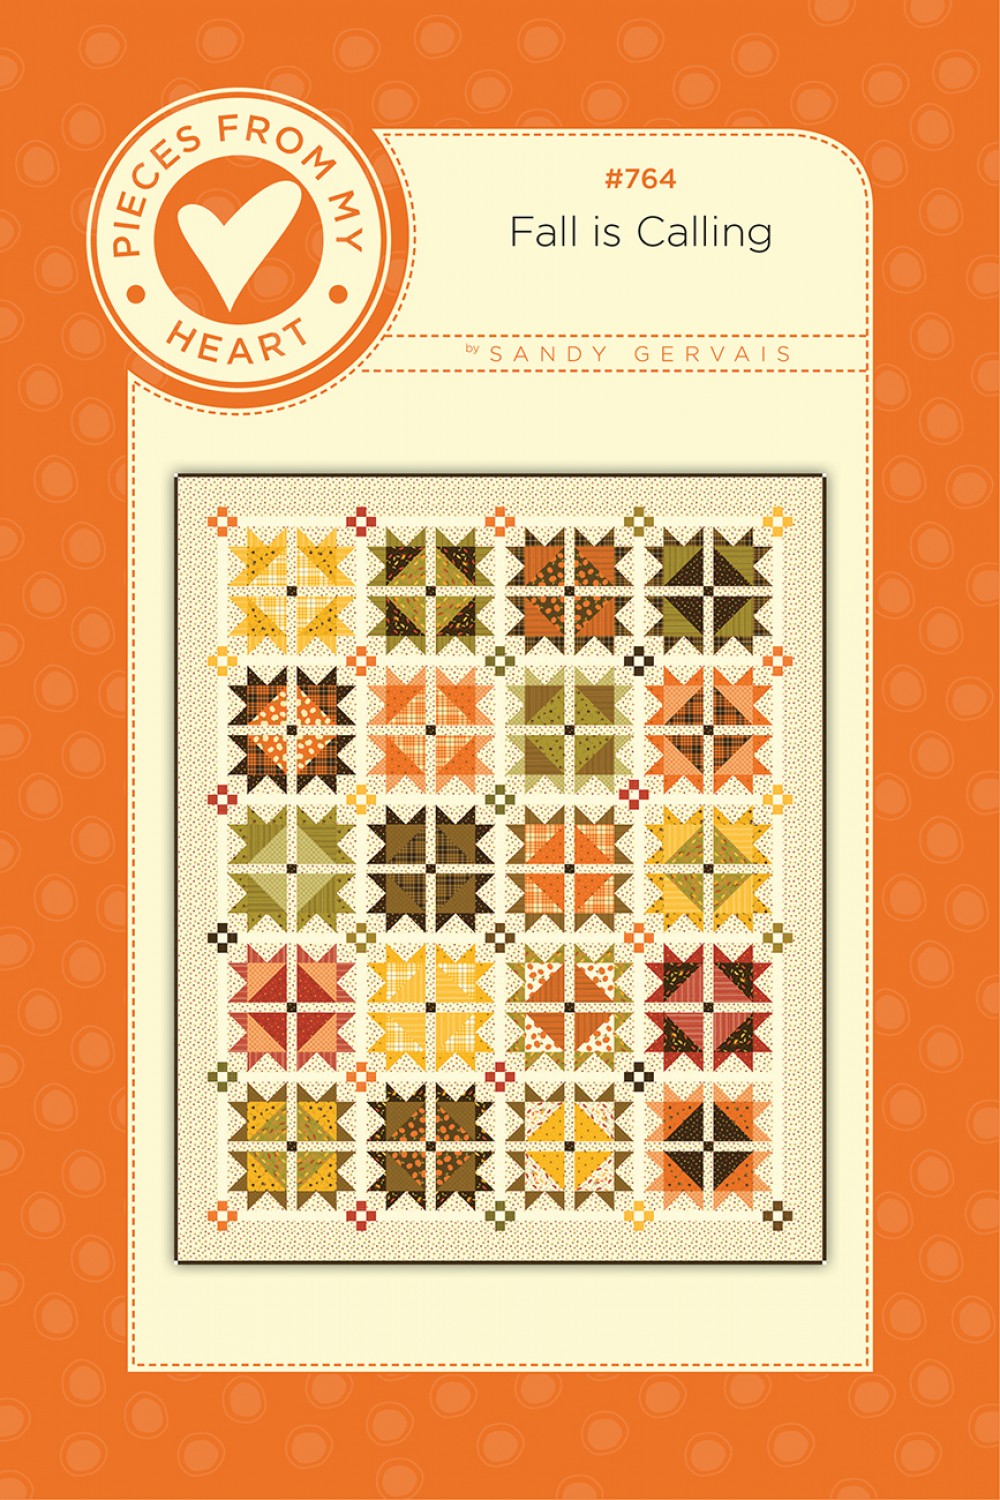 Fall is Calling by Sandy Gervais Quilt Pattern